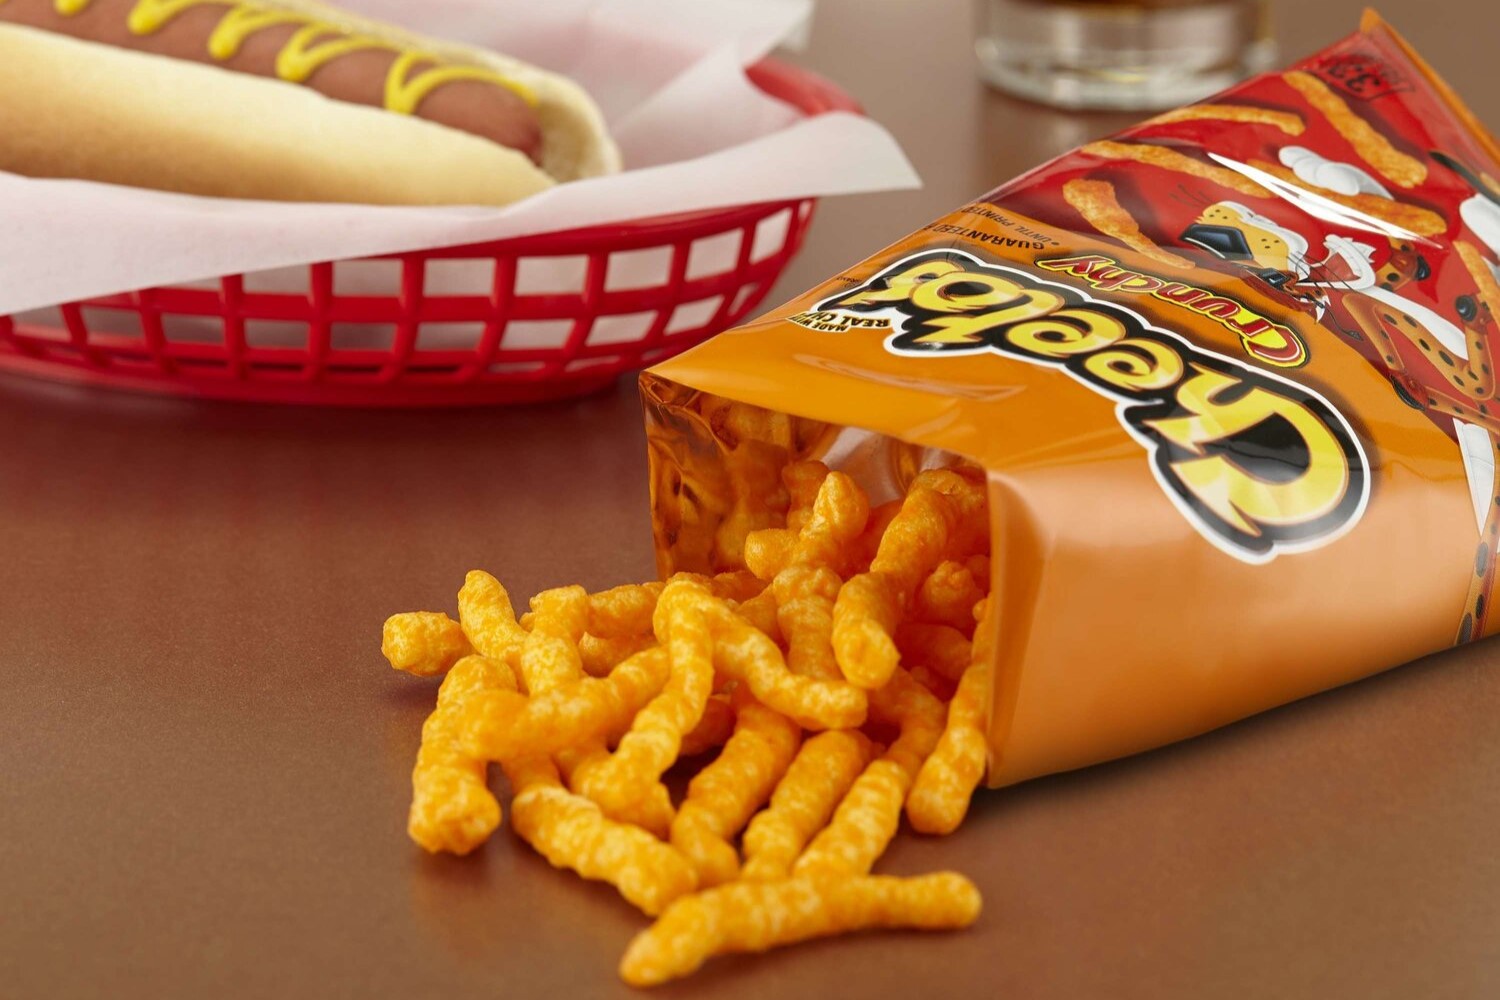 11 Cheetos Crunchy Nutrition Facts 